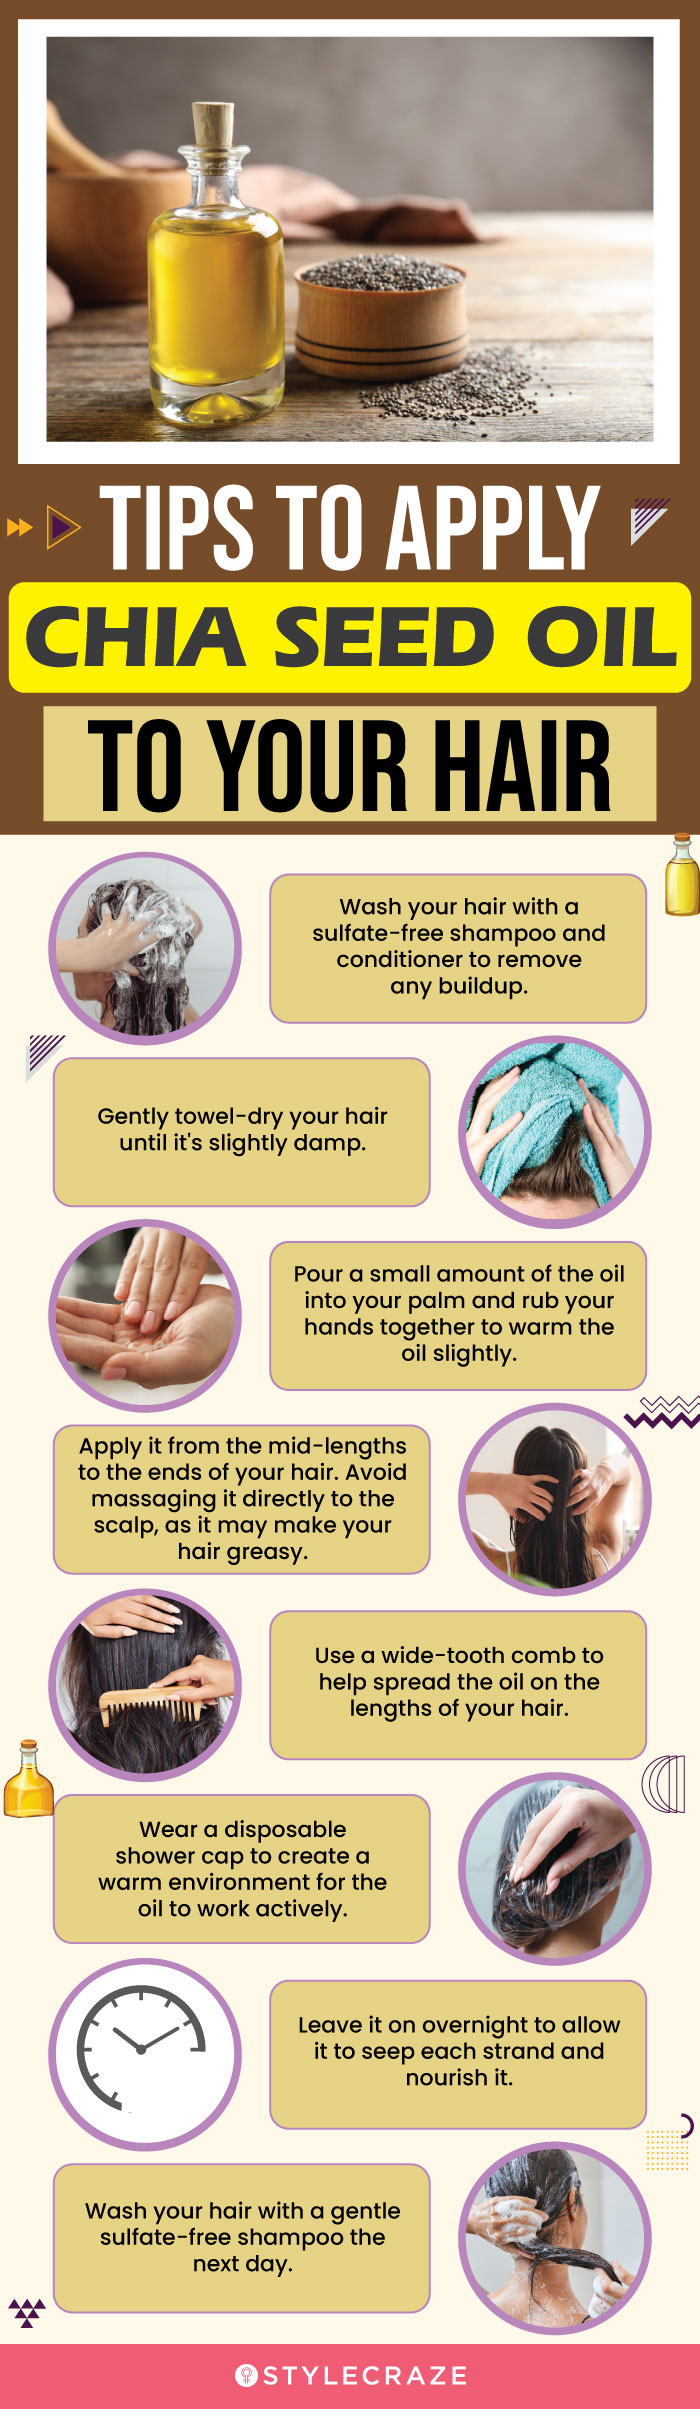 Tips To Apply Chia Seed Oil To Your Hair (infographic)